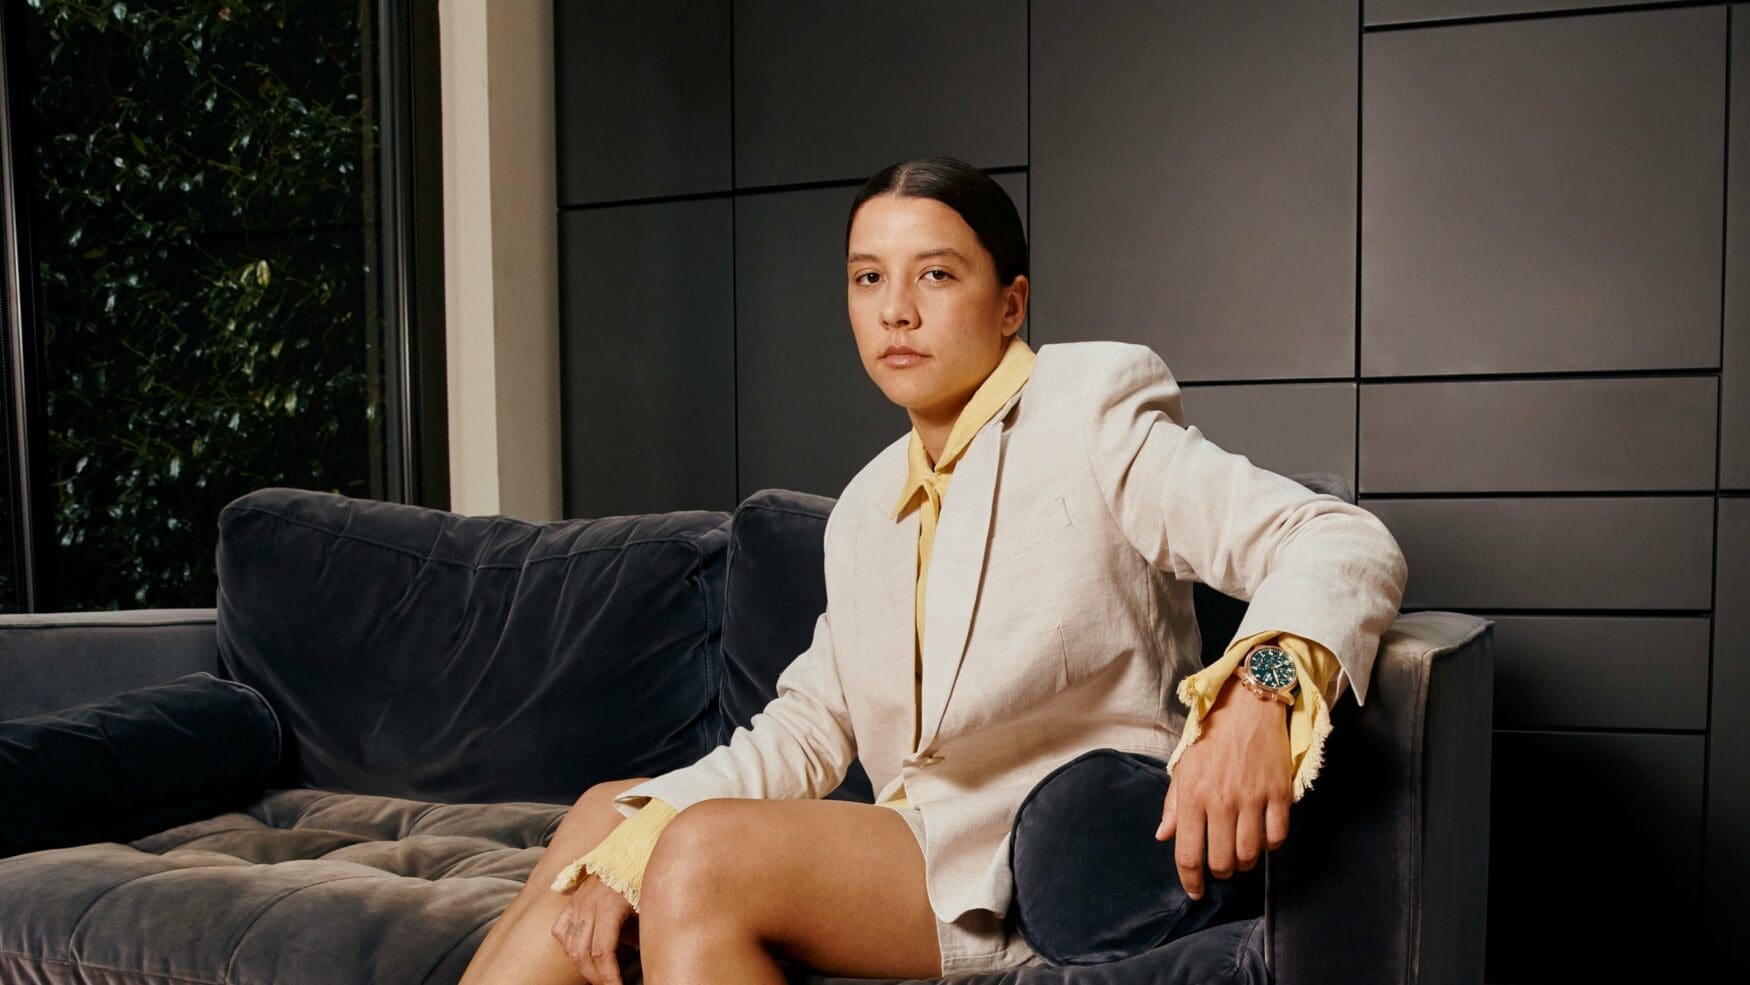 Sam Kerr joins IWC to continue the brand’s tradition of sporting greats